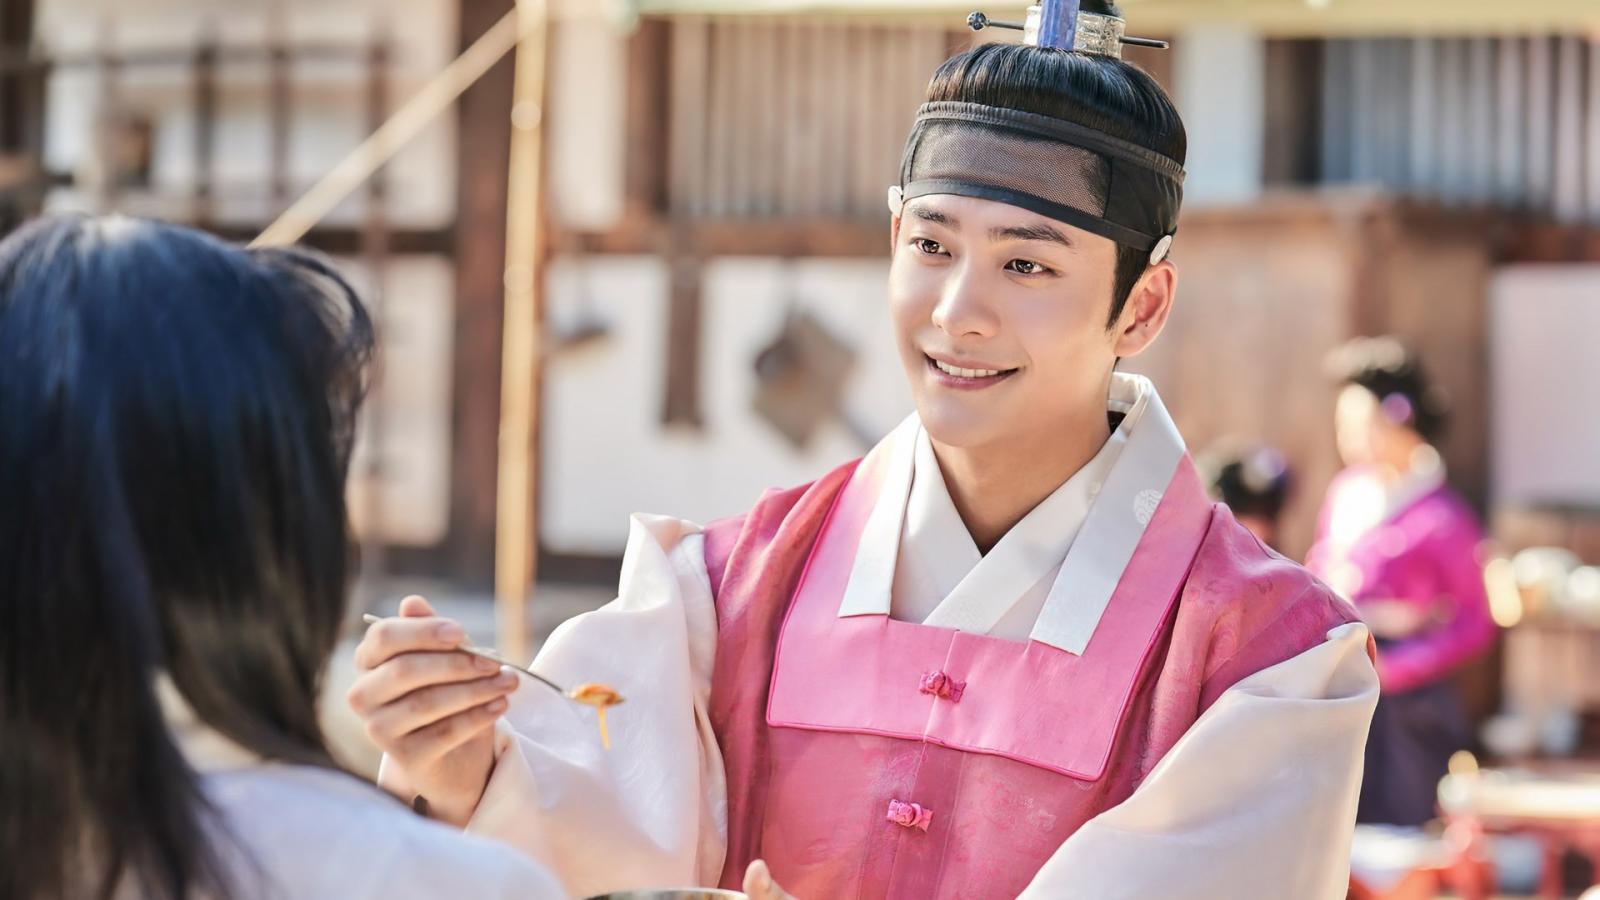 7 Historical K-Dramas to Watch While Waiting for My Dearest Part 2 Premiere - image 3